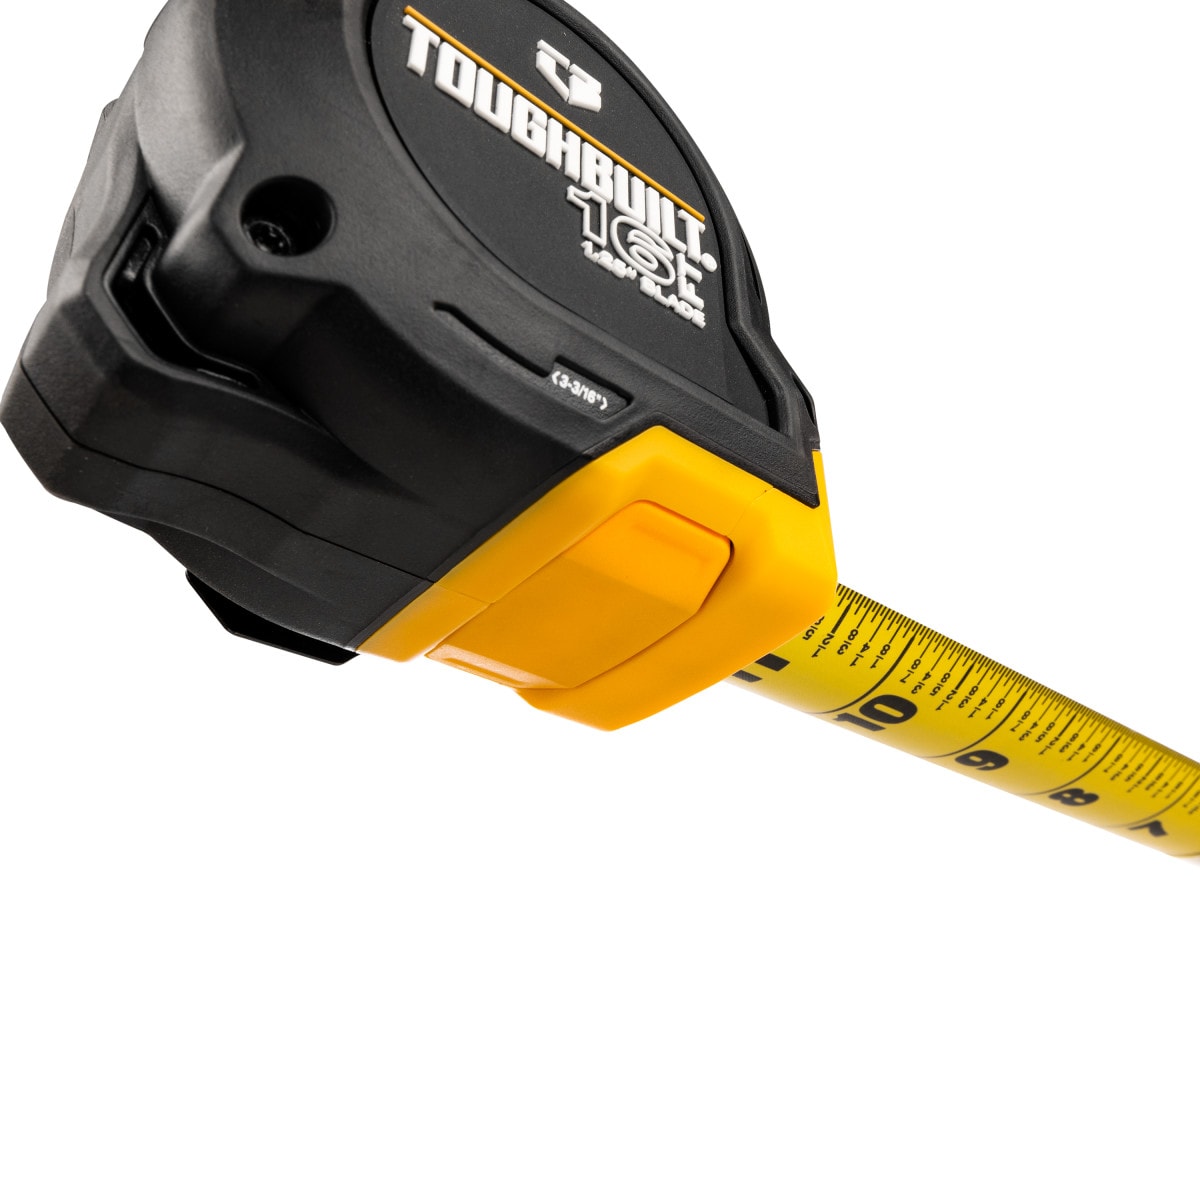 MPOWER R1 Tape Measure, 16 ft. / 5M